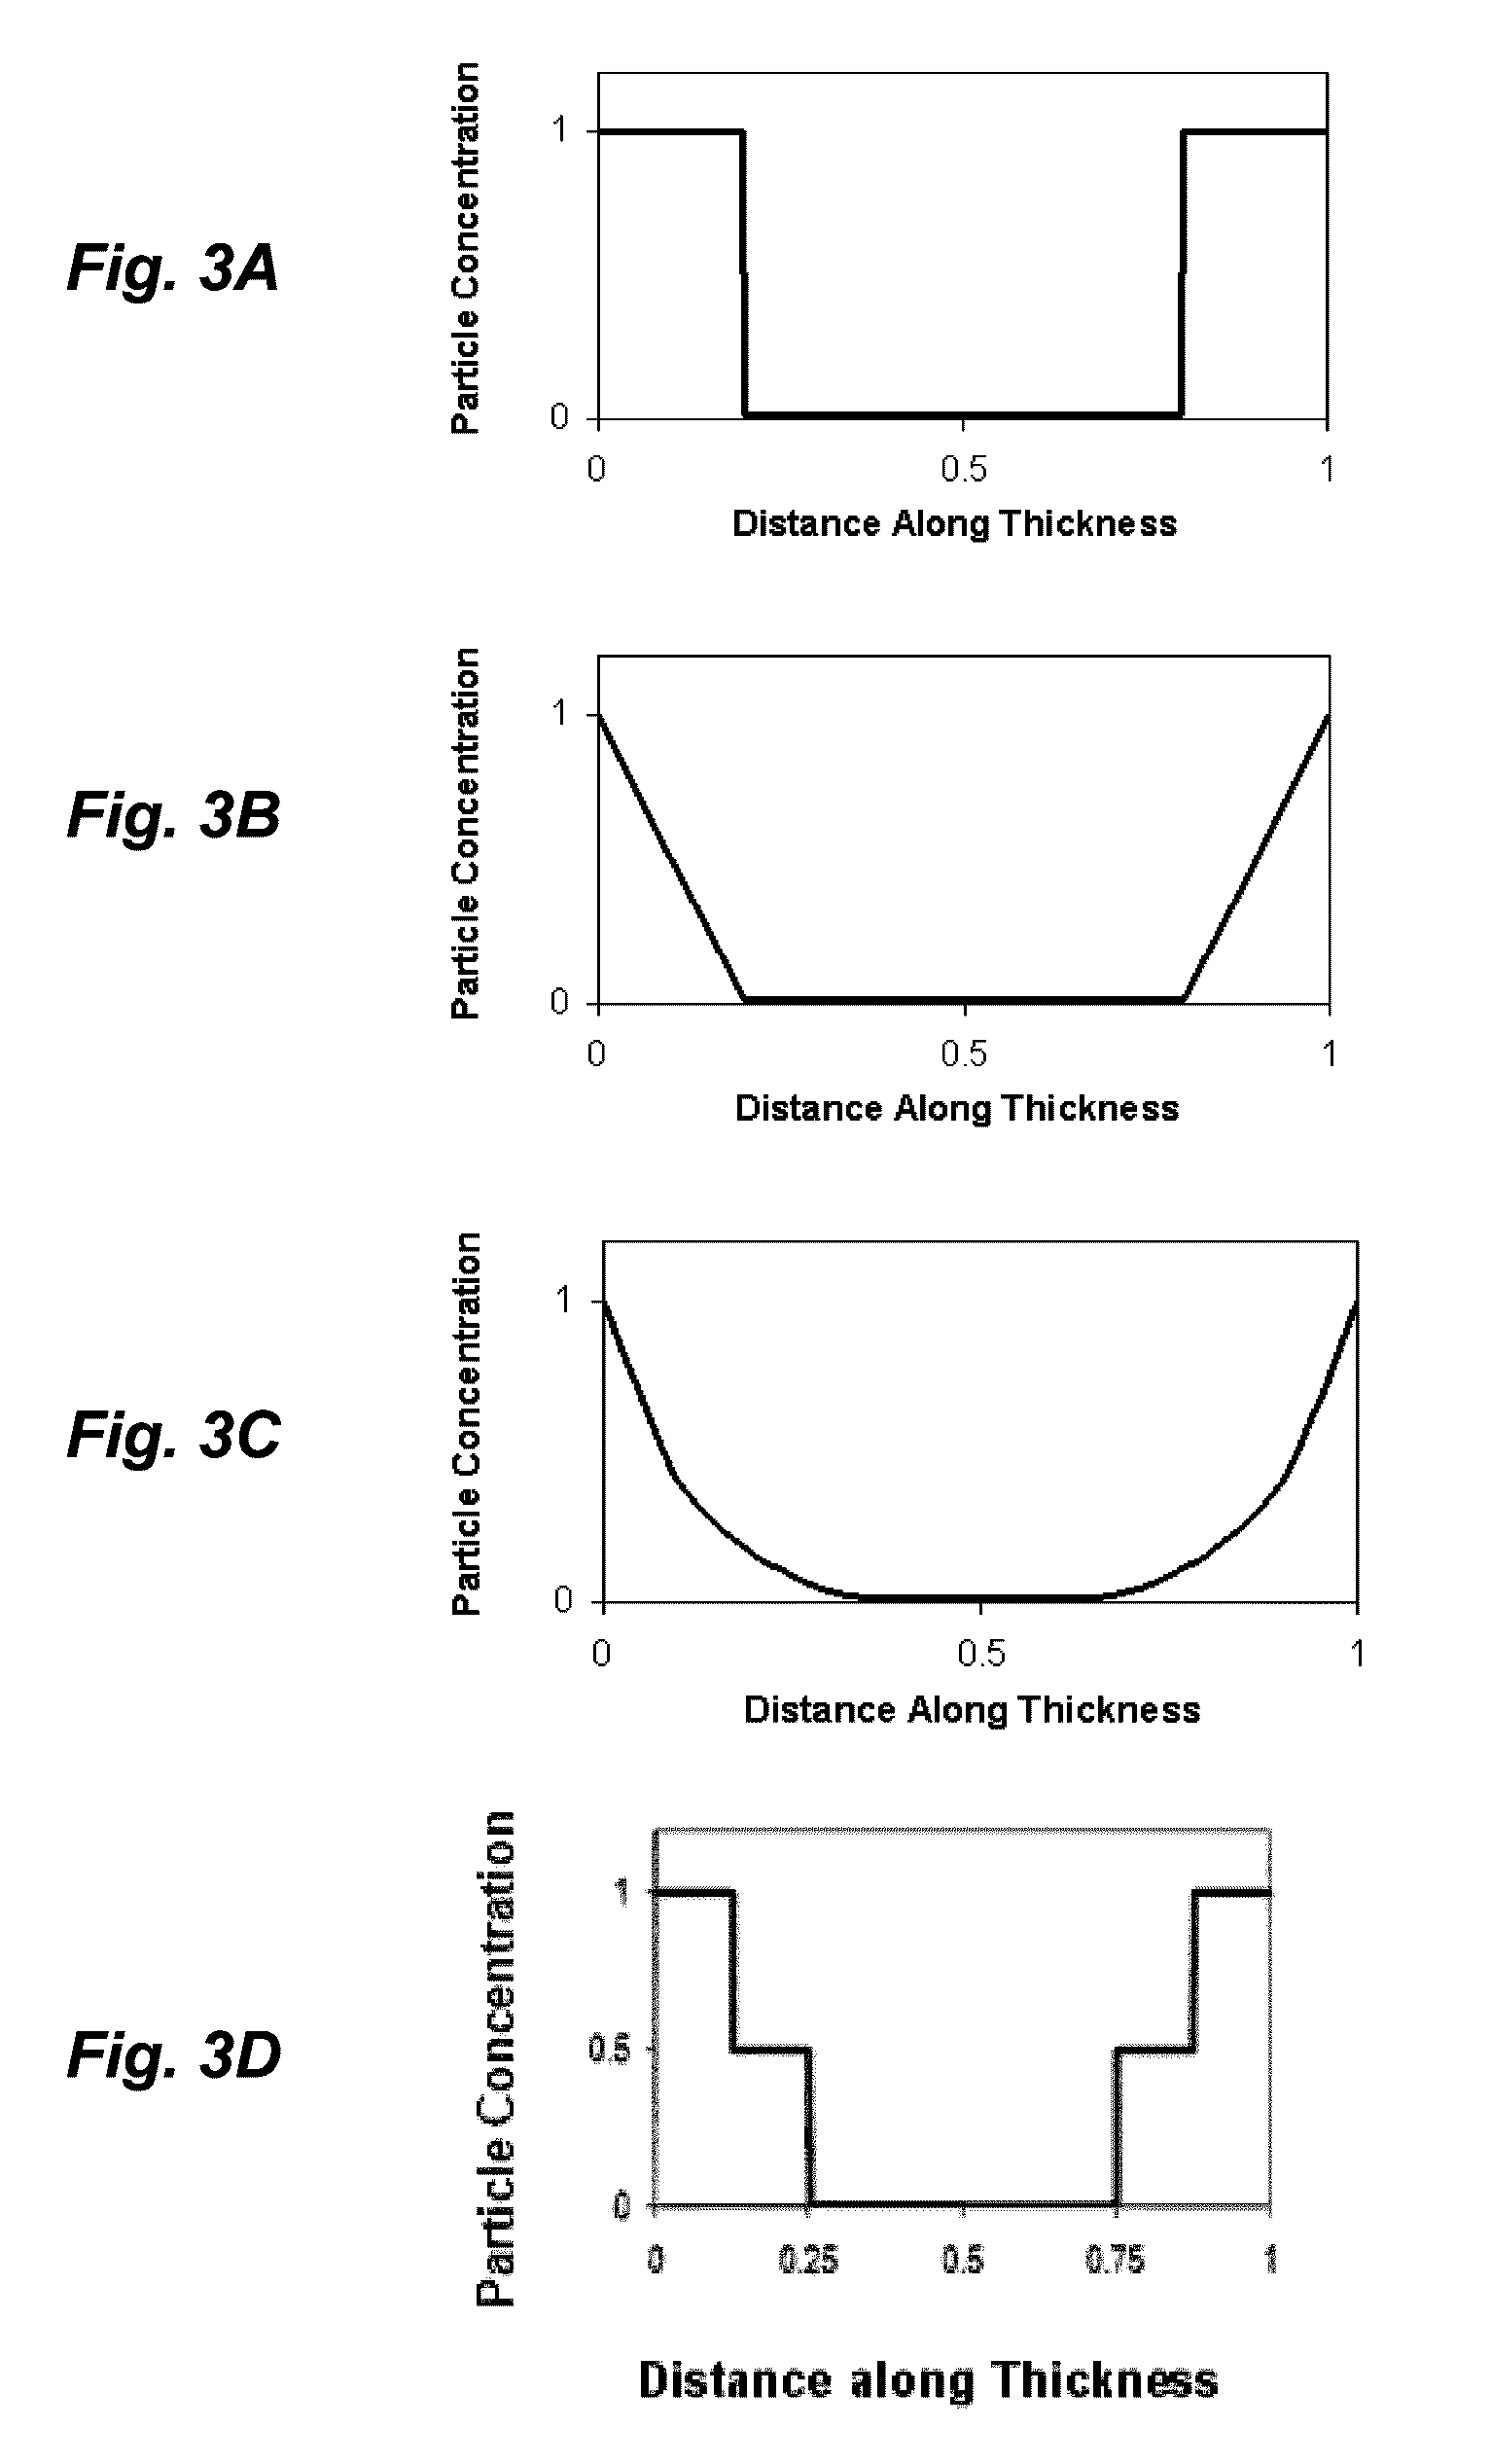 Ionic polymer devices and methods of fabricating the same